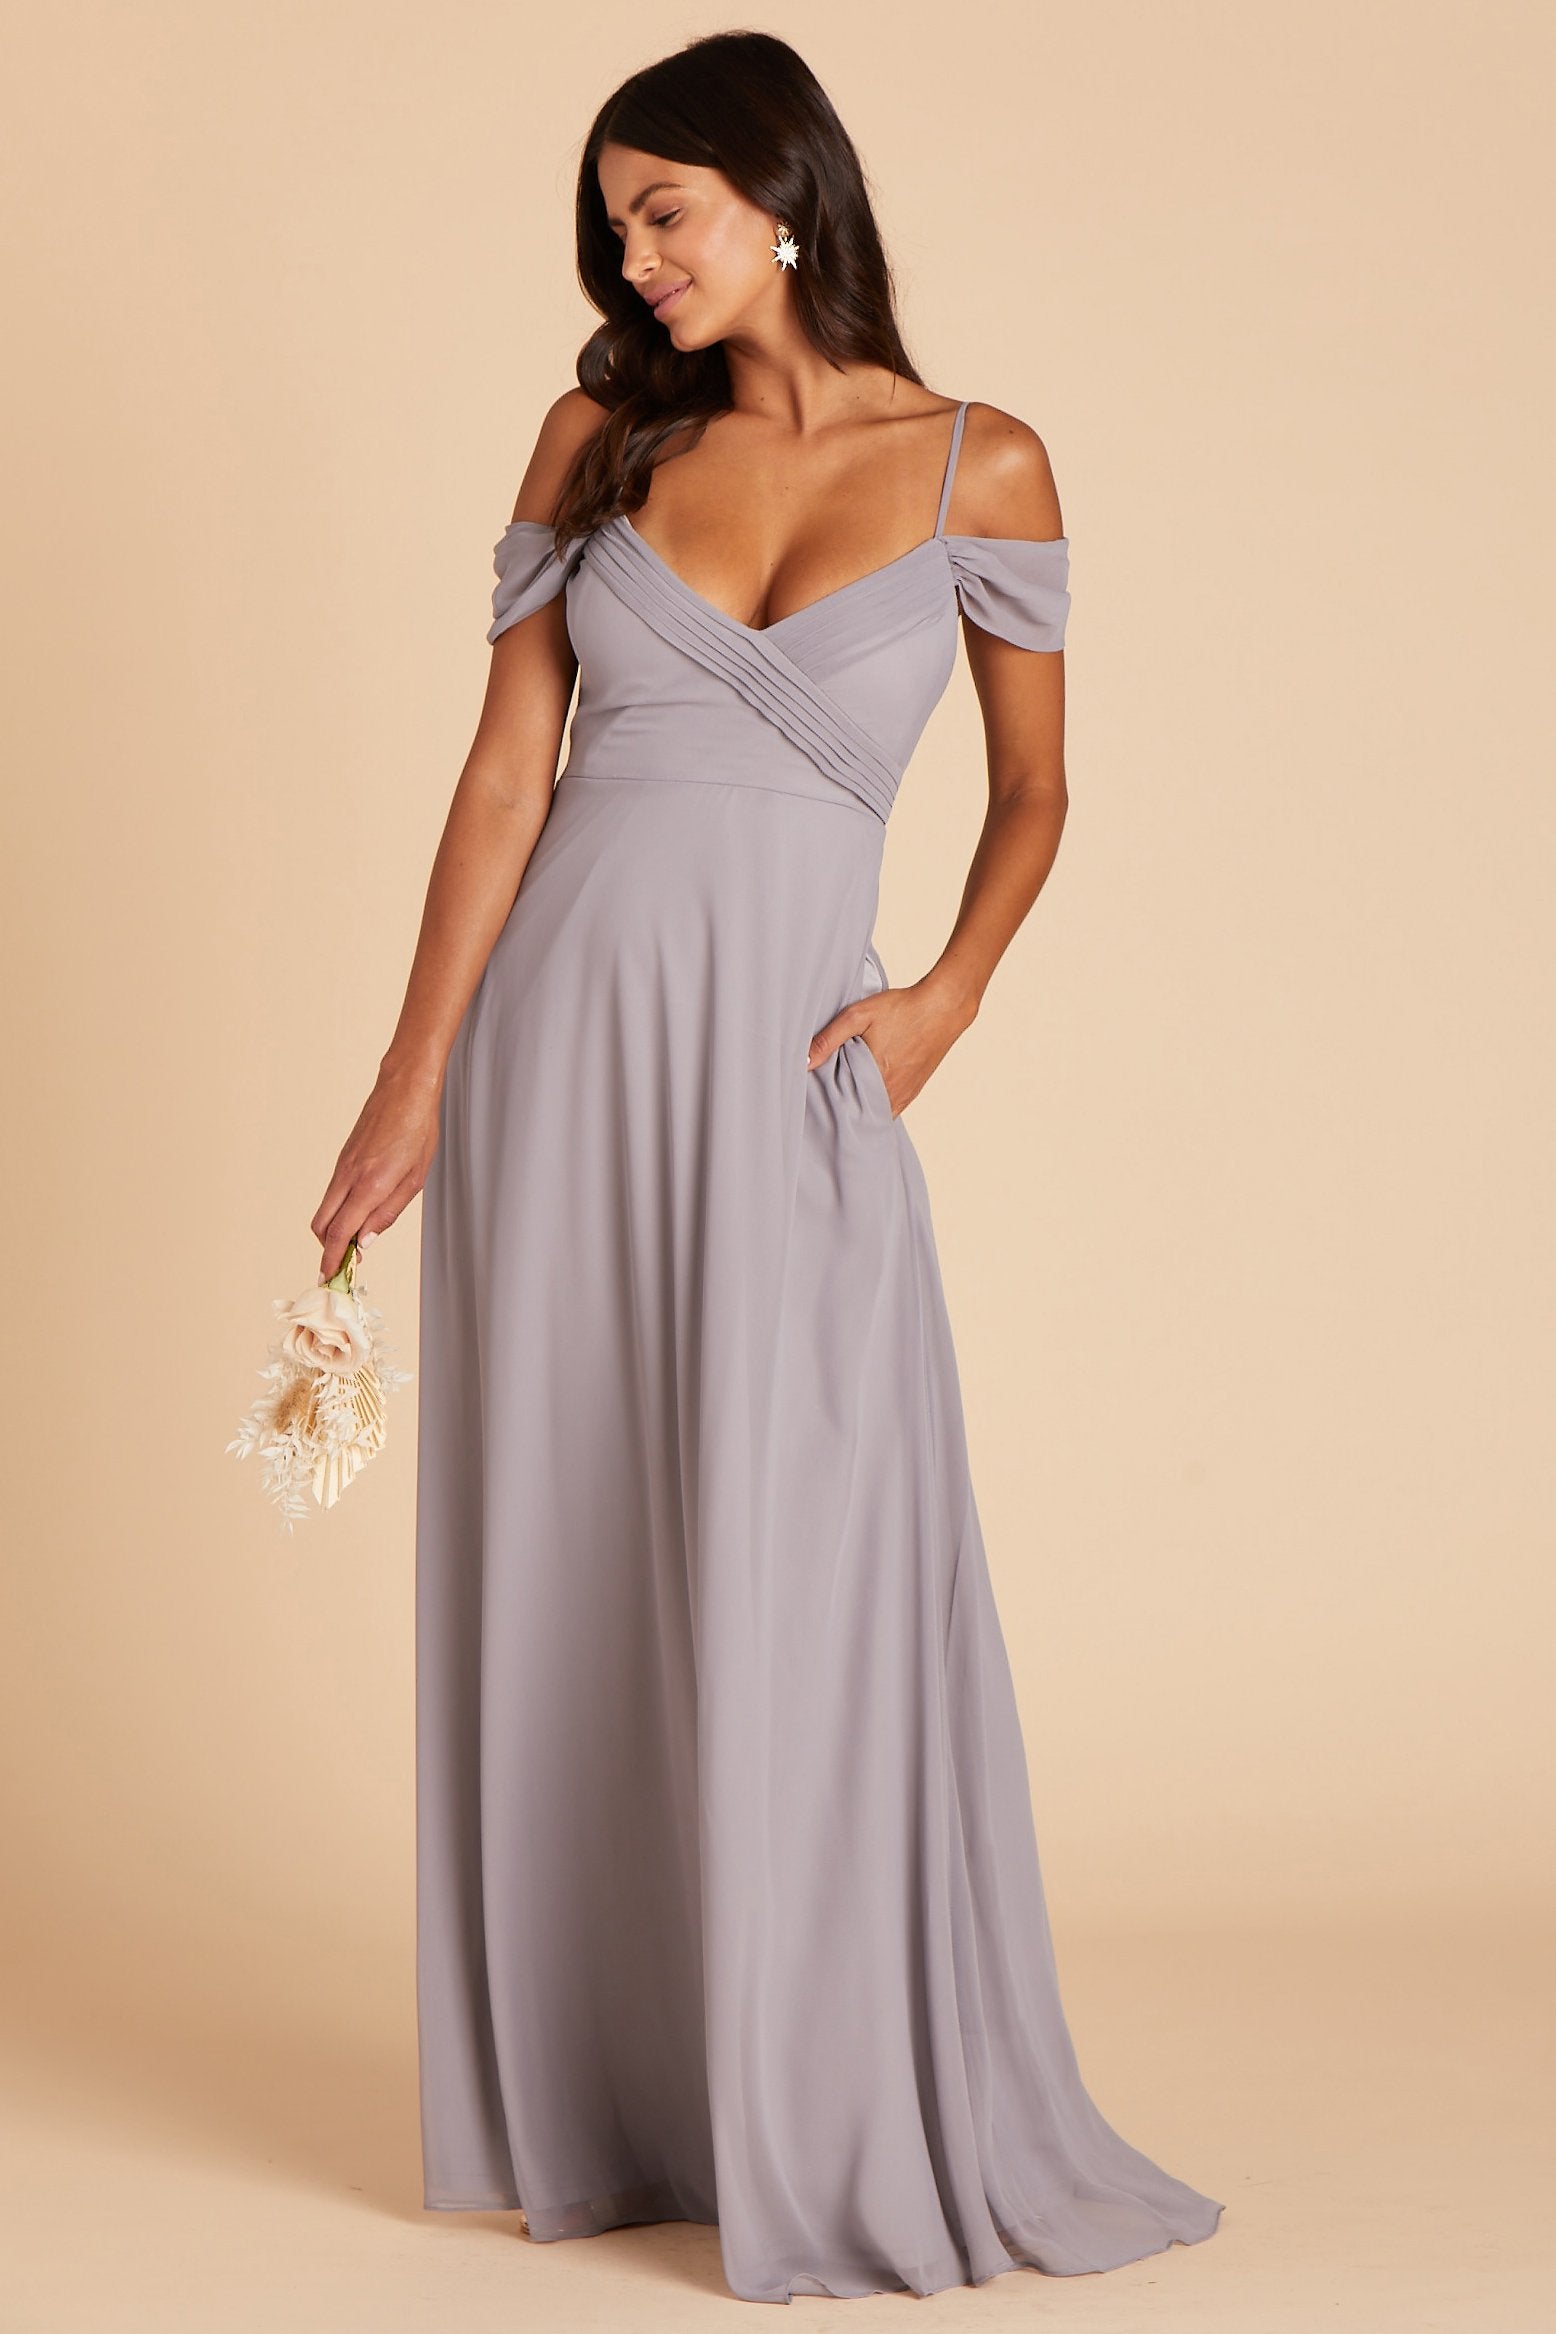 Spence convertible bridesmaids dress in silver chiffon by Birdy Grey, front view with hand in pocket